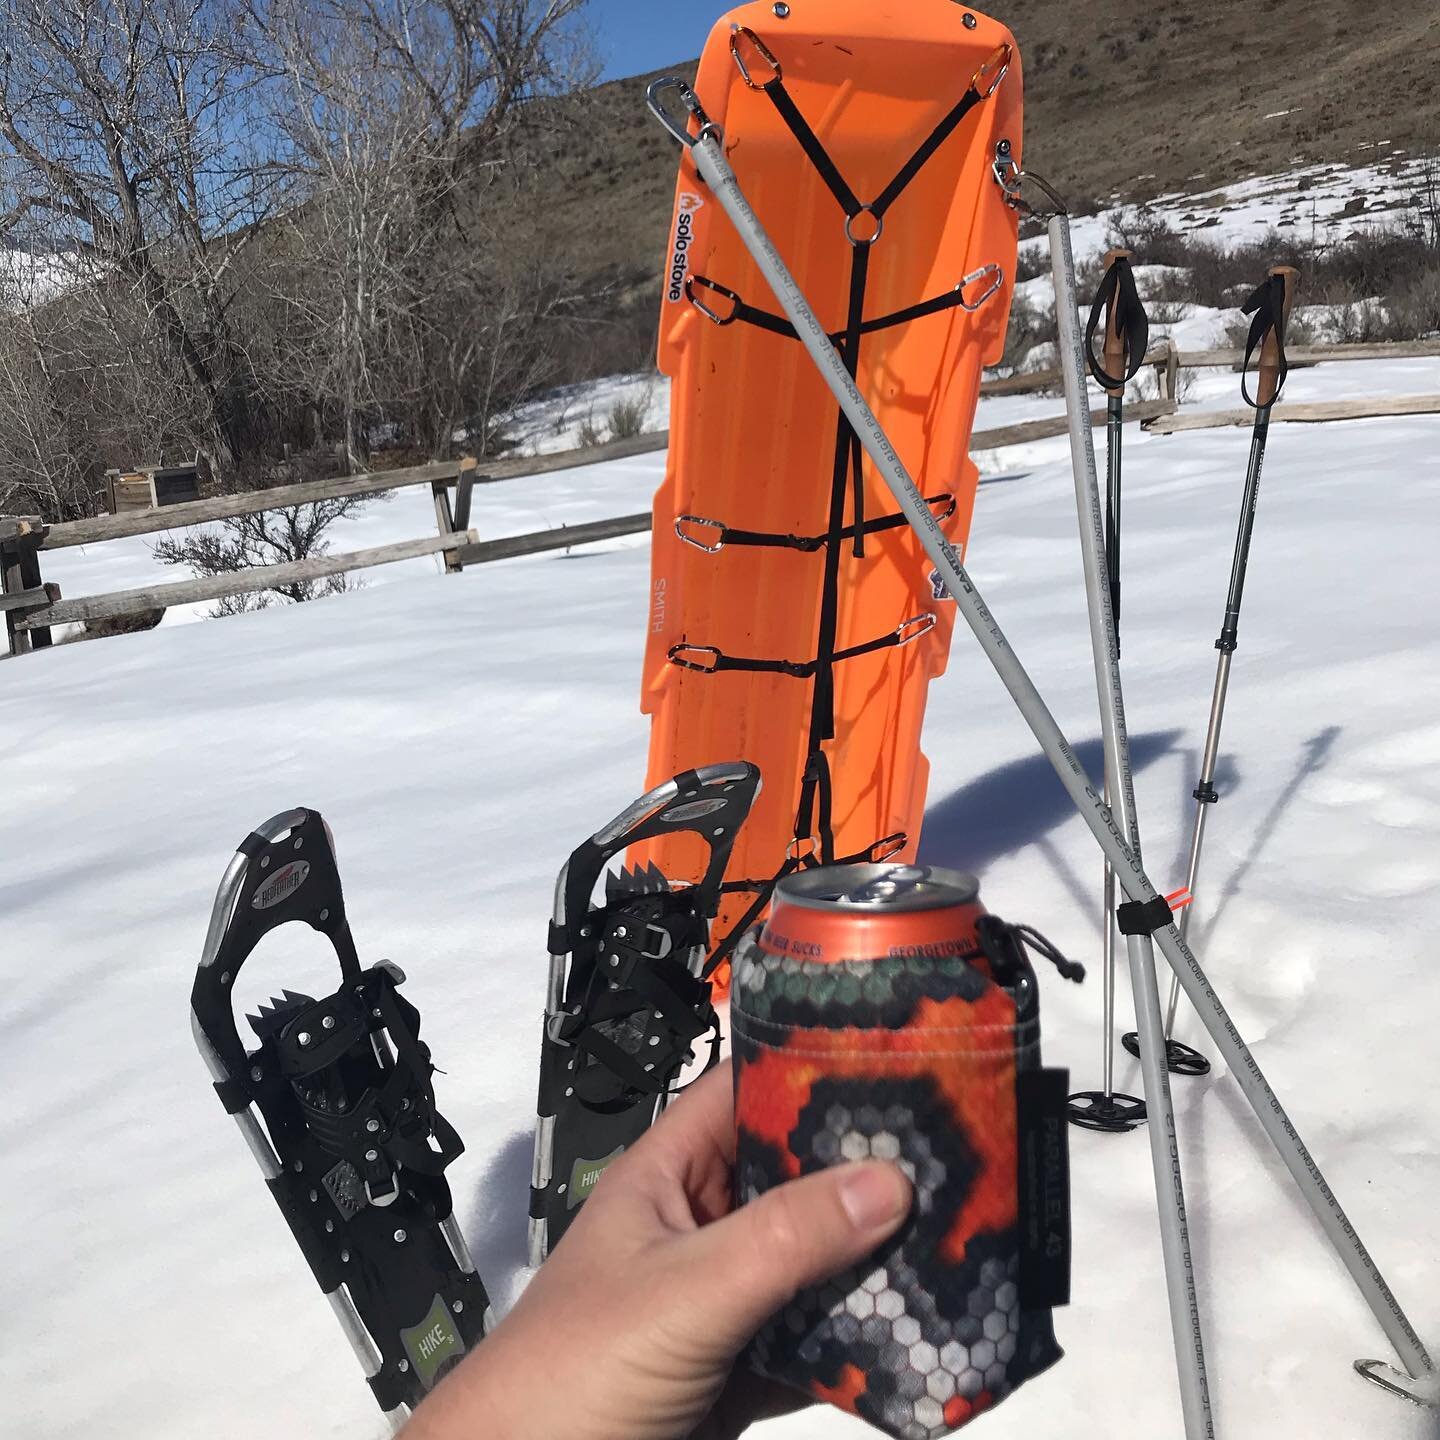 Parallel 43 accessories are built for all conditions. 

The Shelter Bag worked great for organizing gear and keeping it dry in the pulk. The can coozie did its job as always. 

If you&rsquo;re looking for outdoor storage options and accessories pleas